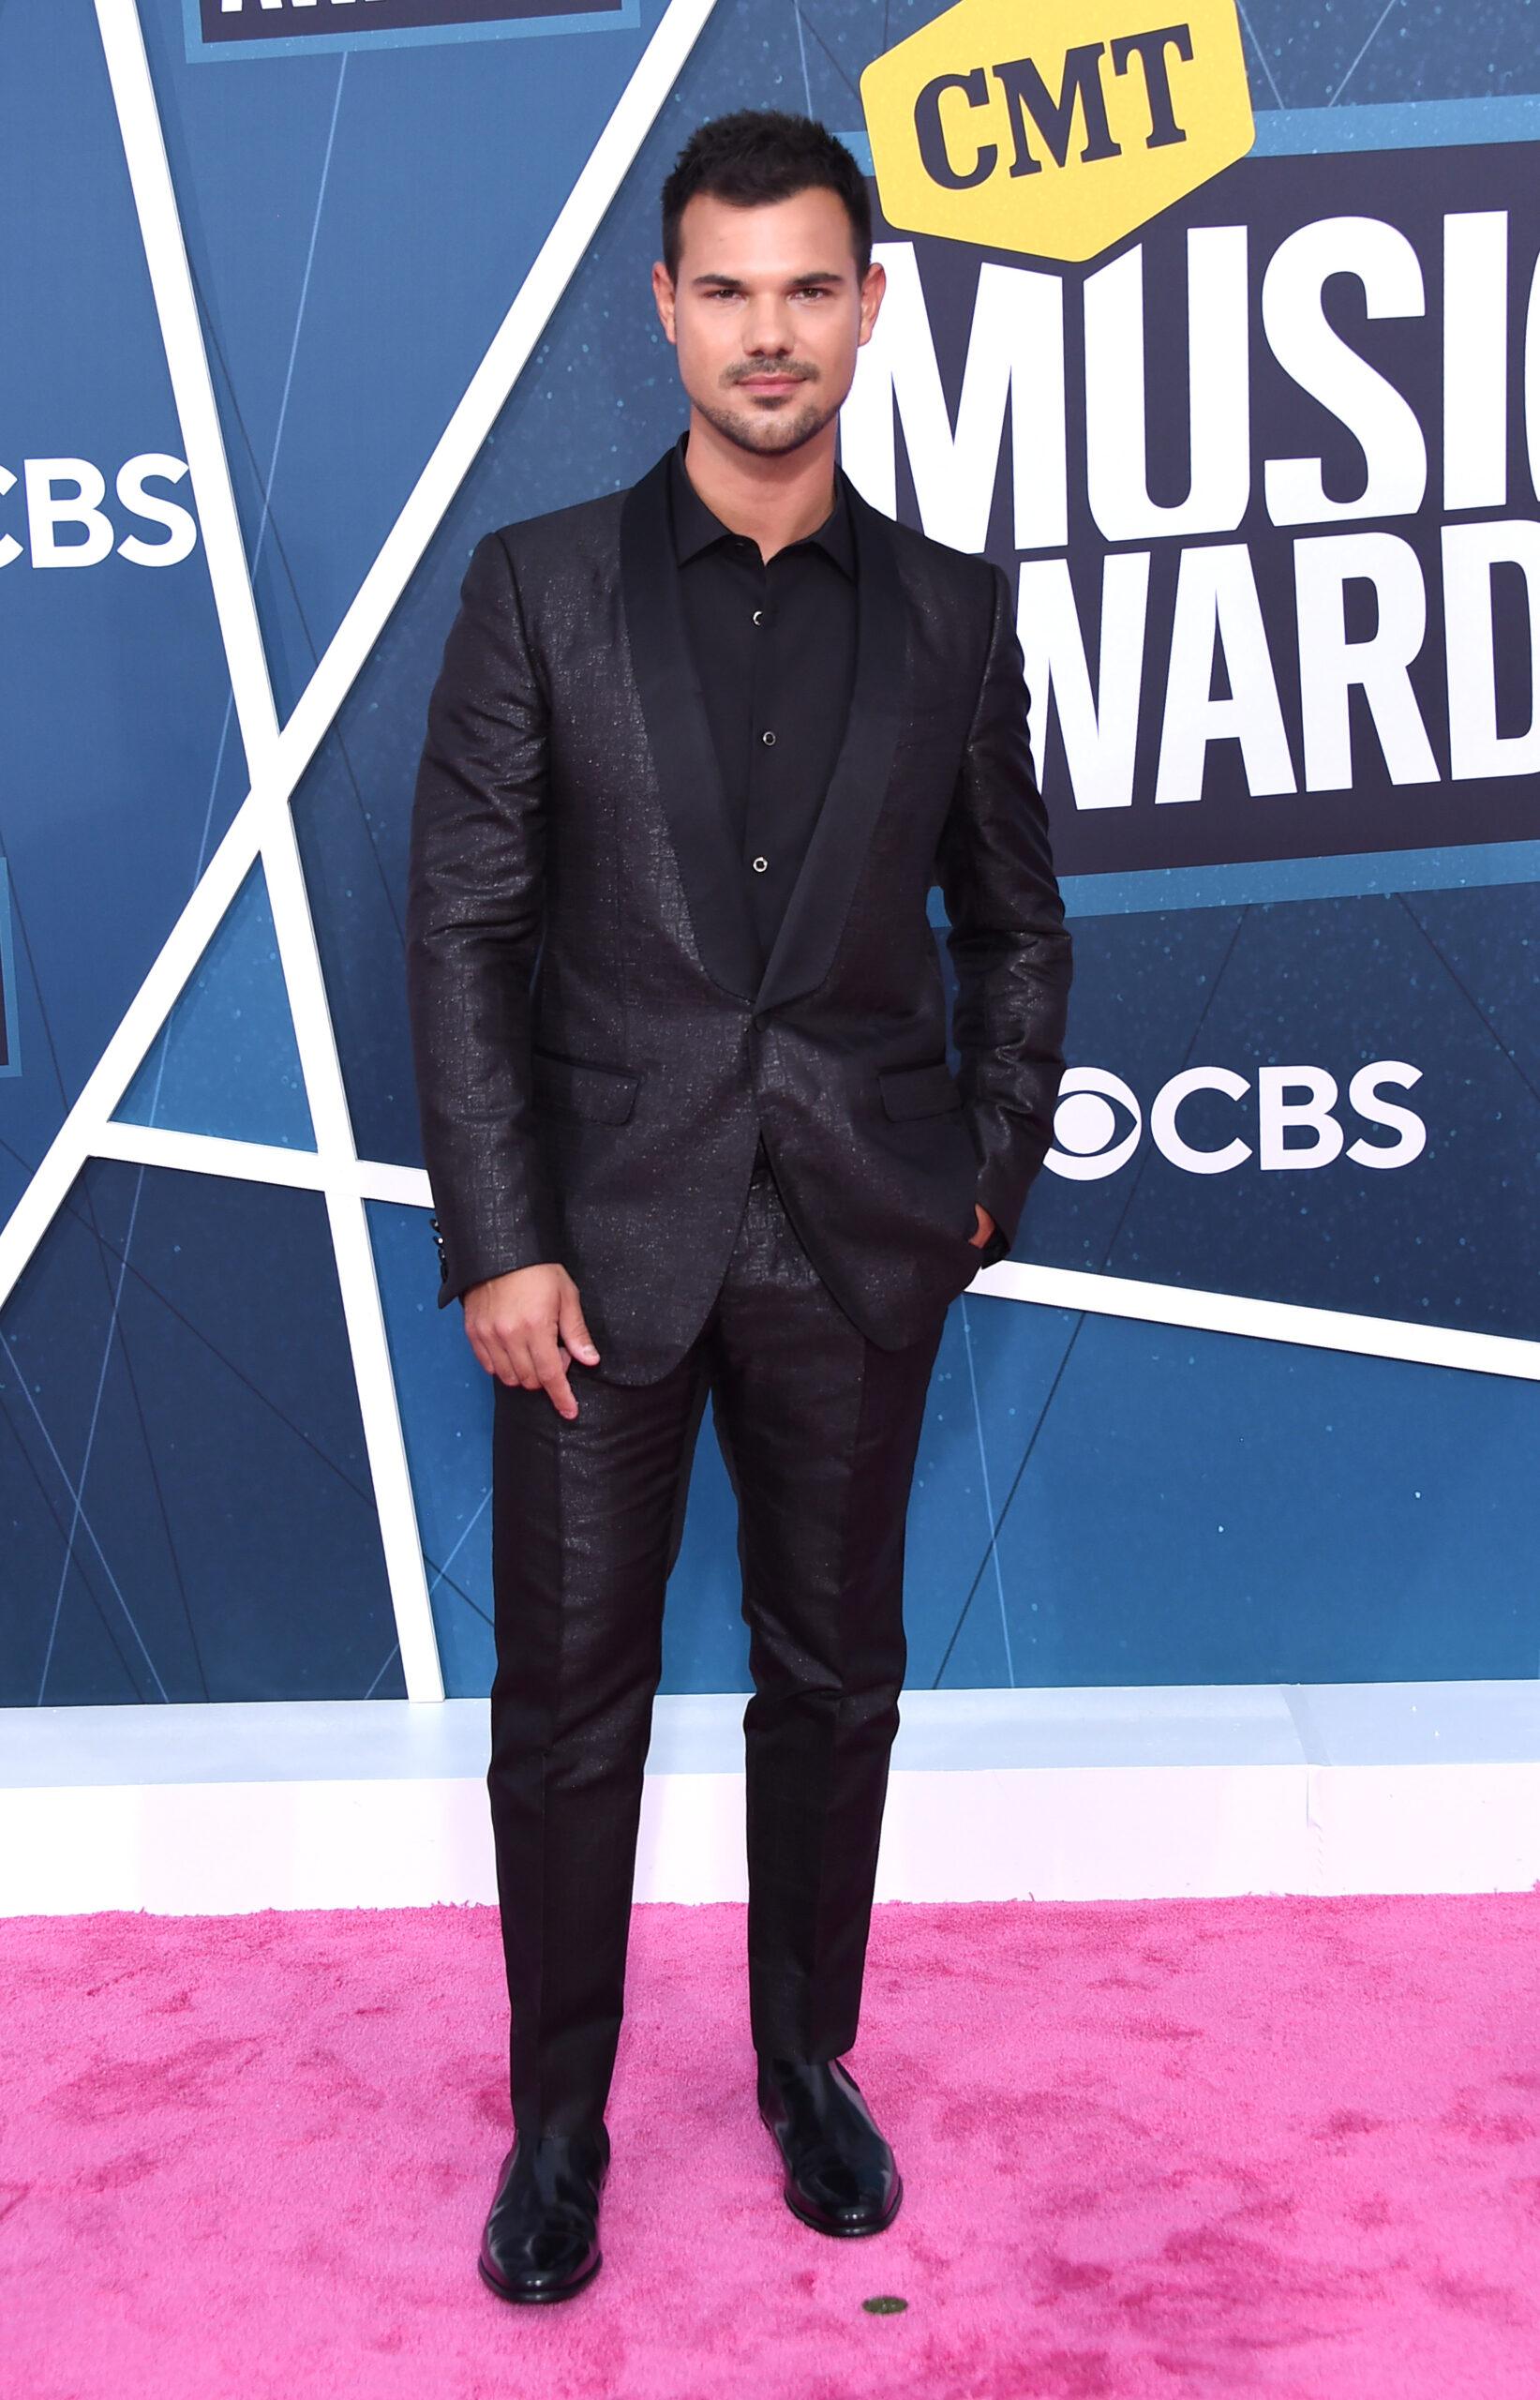 Taylor Lautner at the 2022 CMT Music Awards